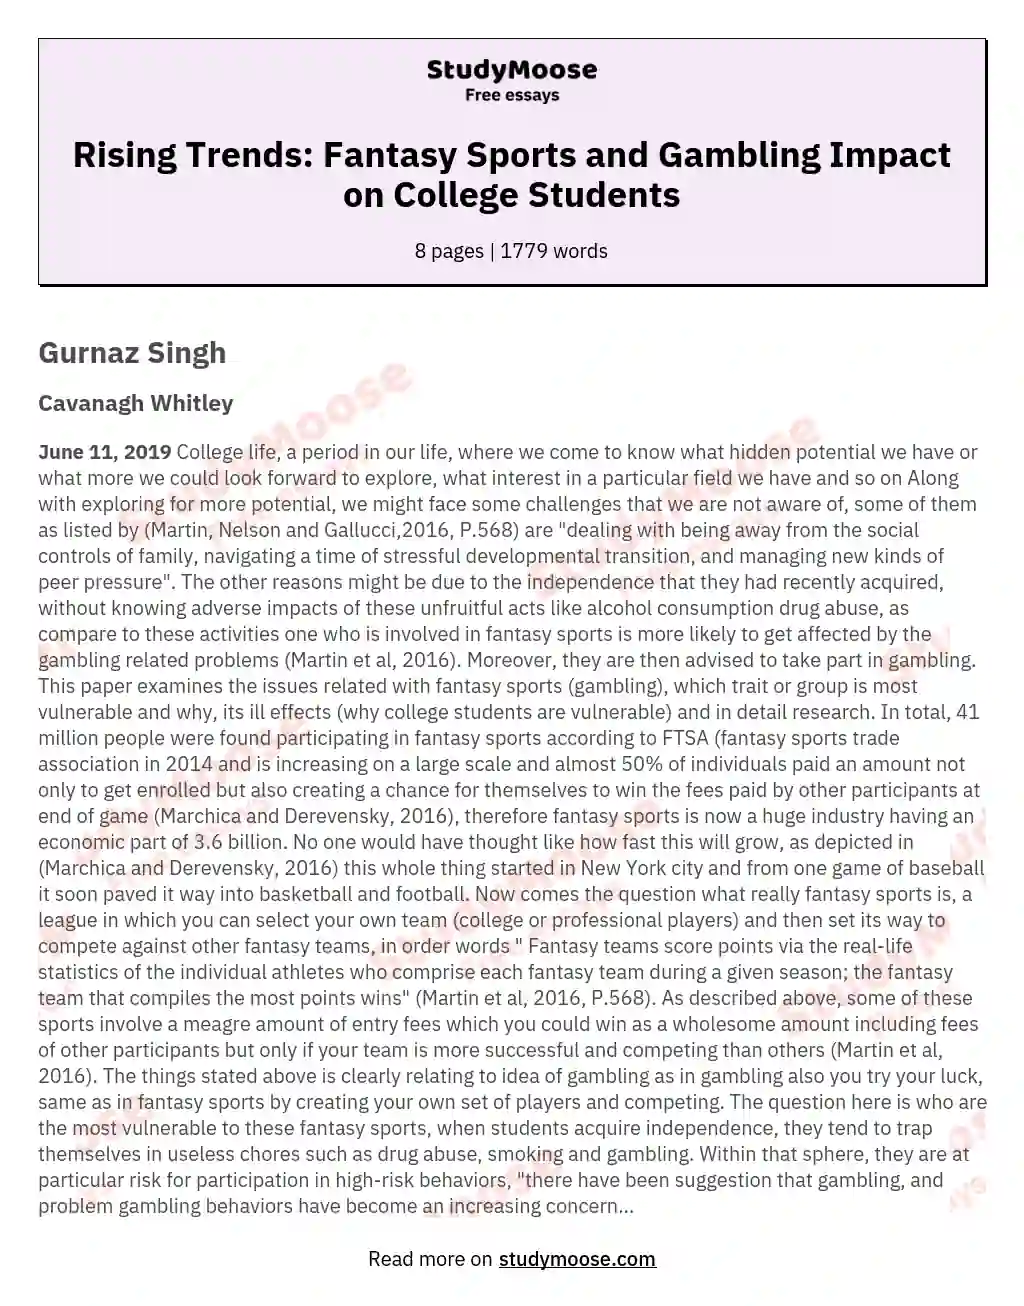 Rising Trends: Fantasy Sports and Gambling Impact on College Students essay